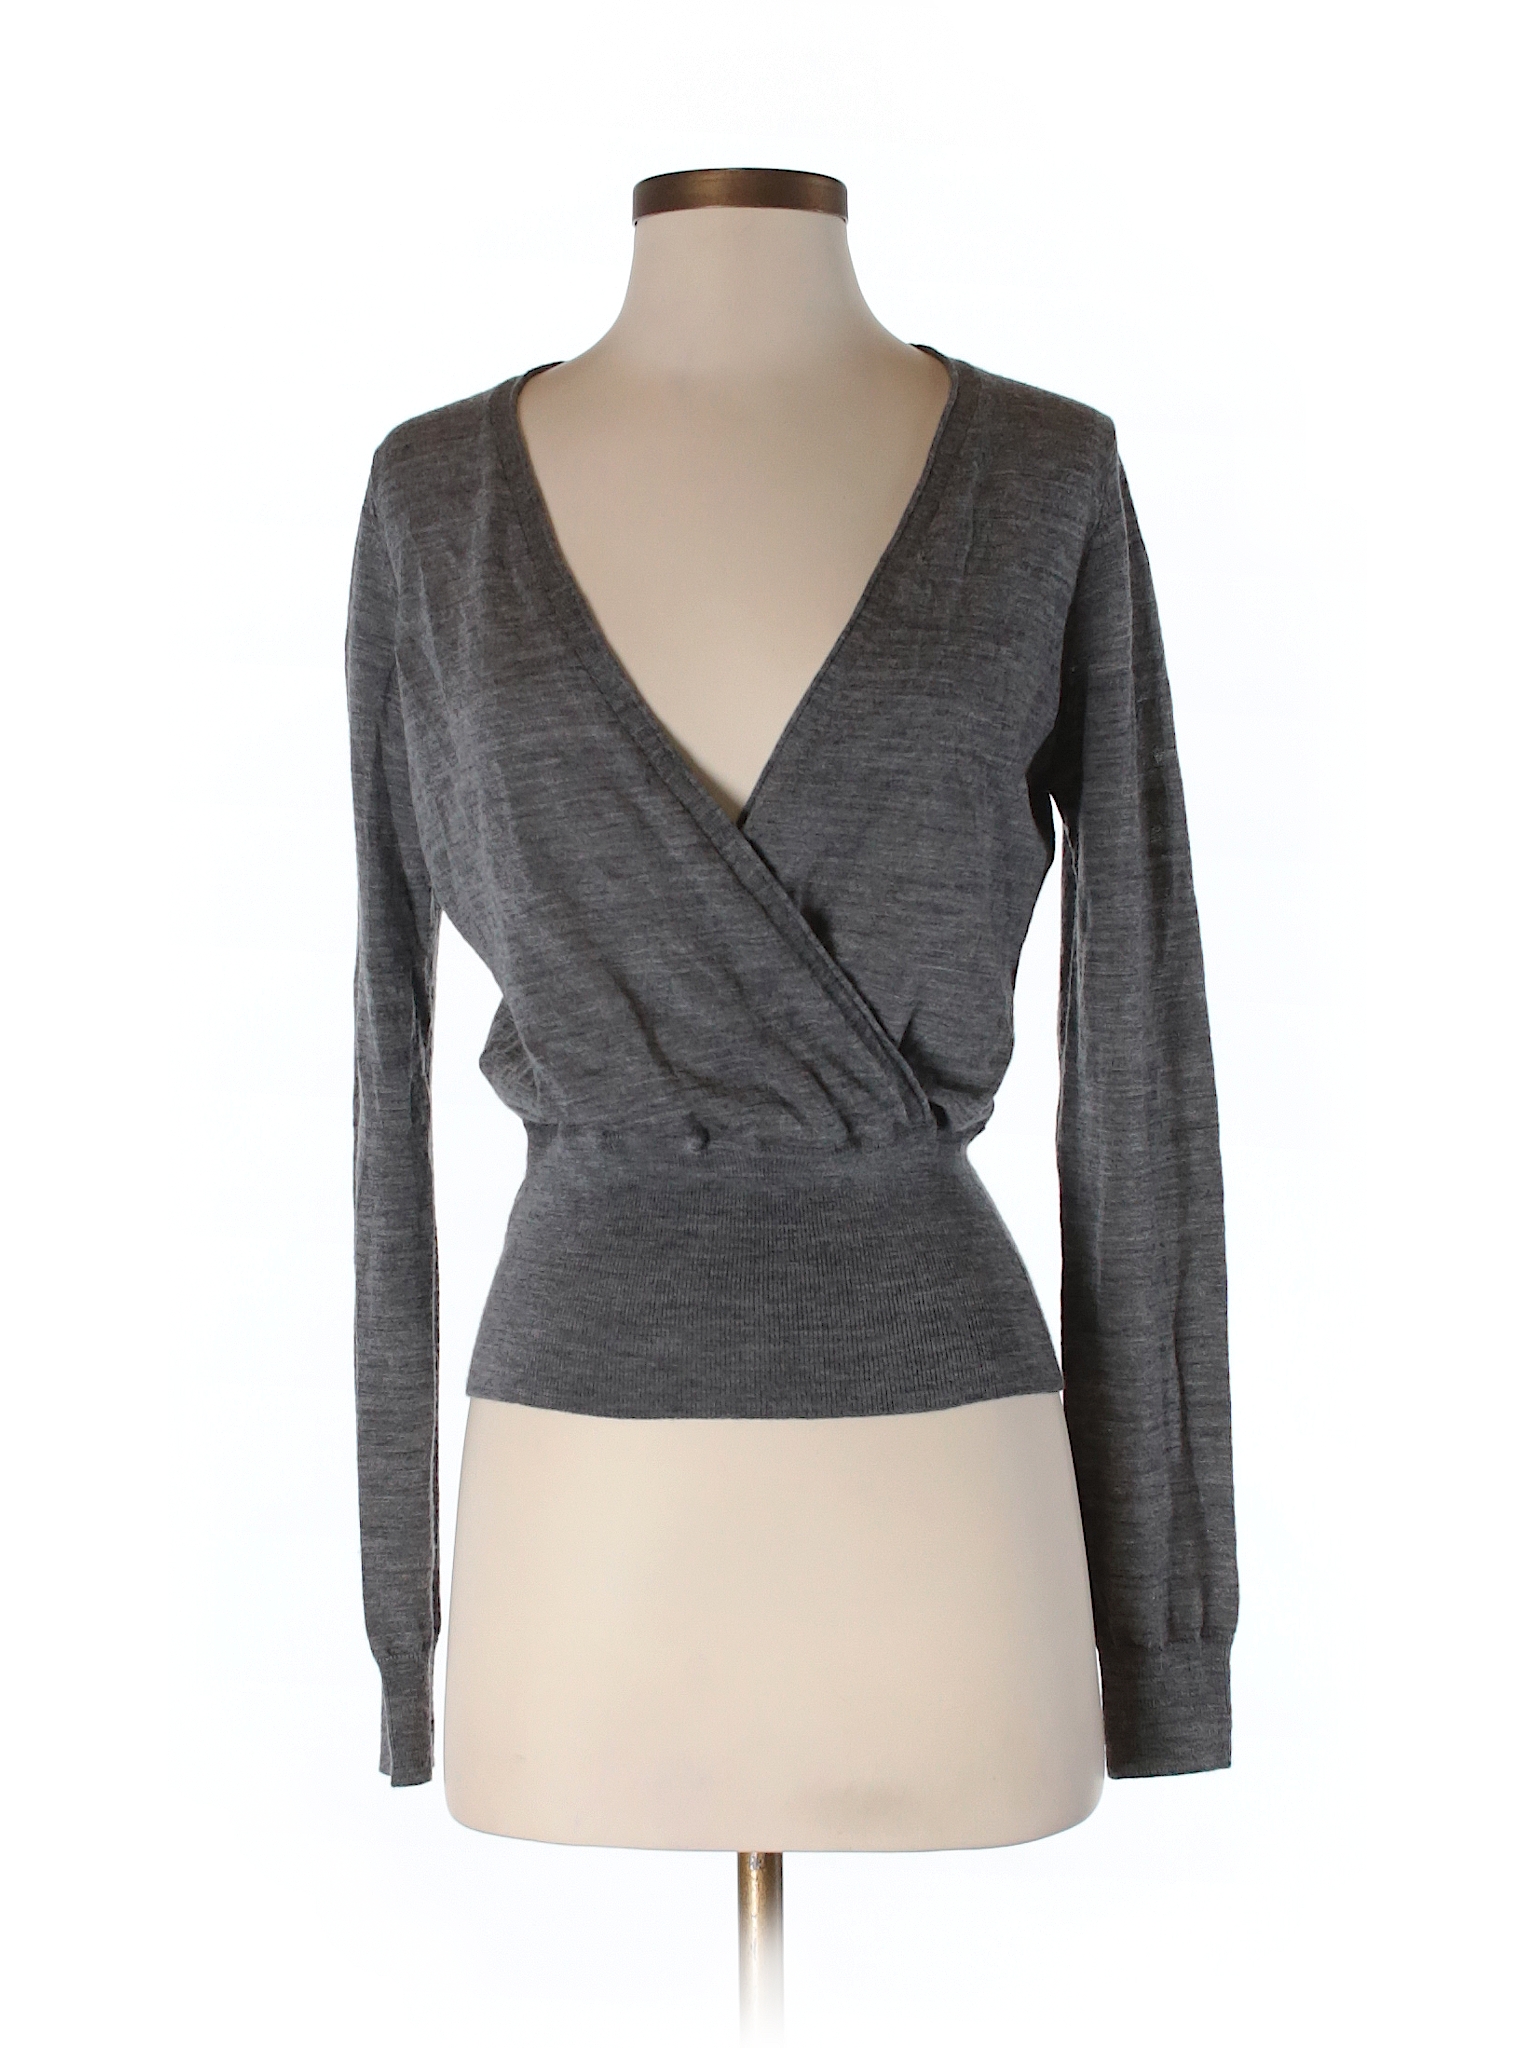 BCBGMAXAZRIA 100% Wool Solid Gray Wool Pullover Sweater Size XS - 80% ...